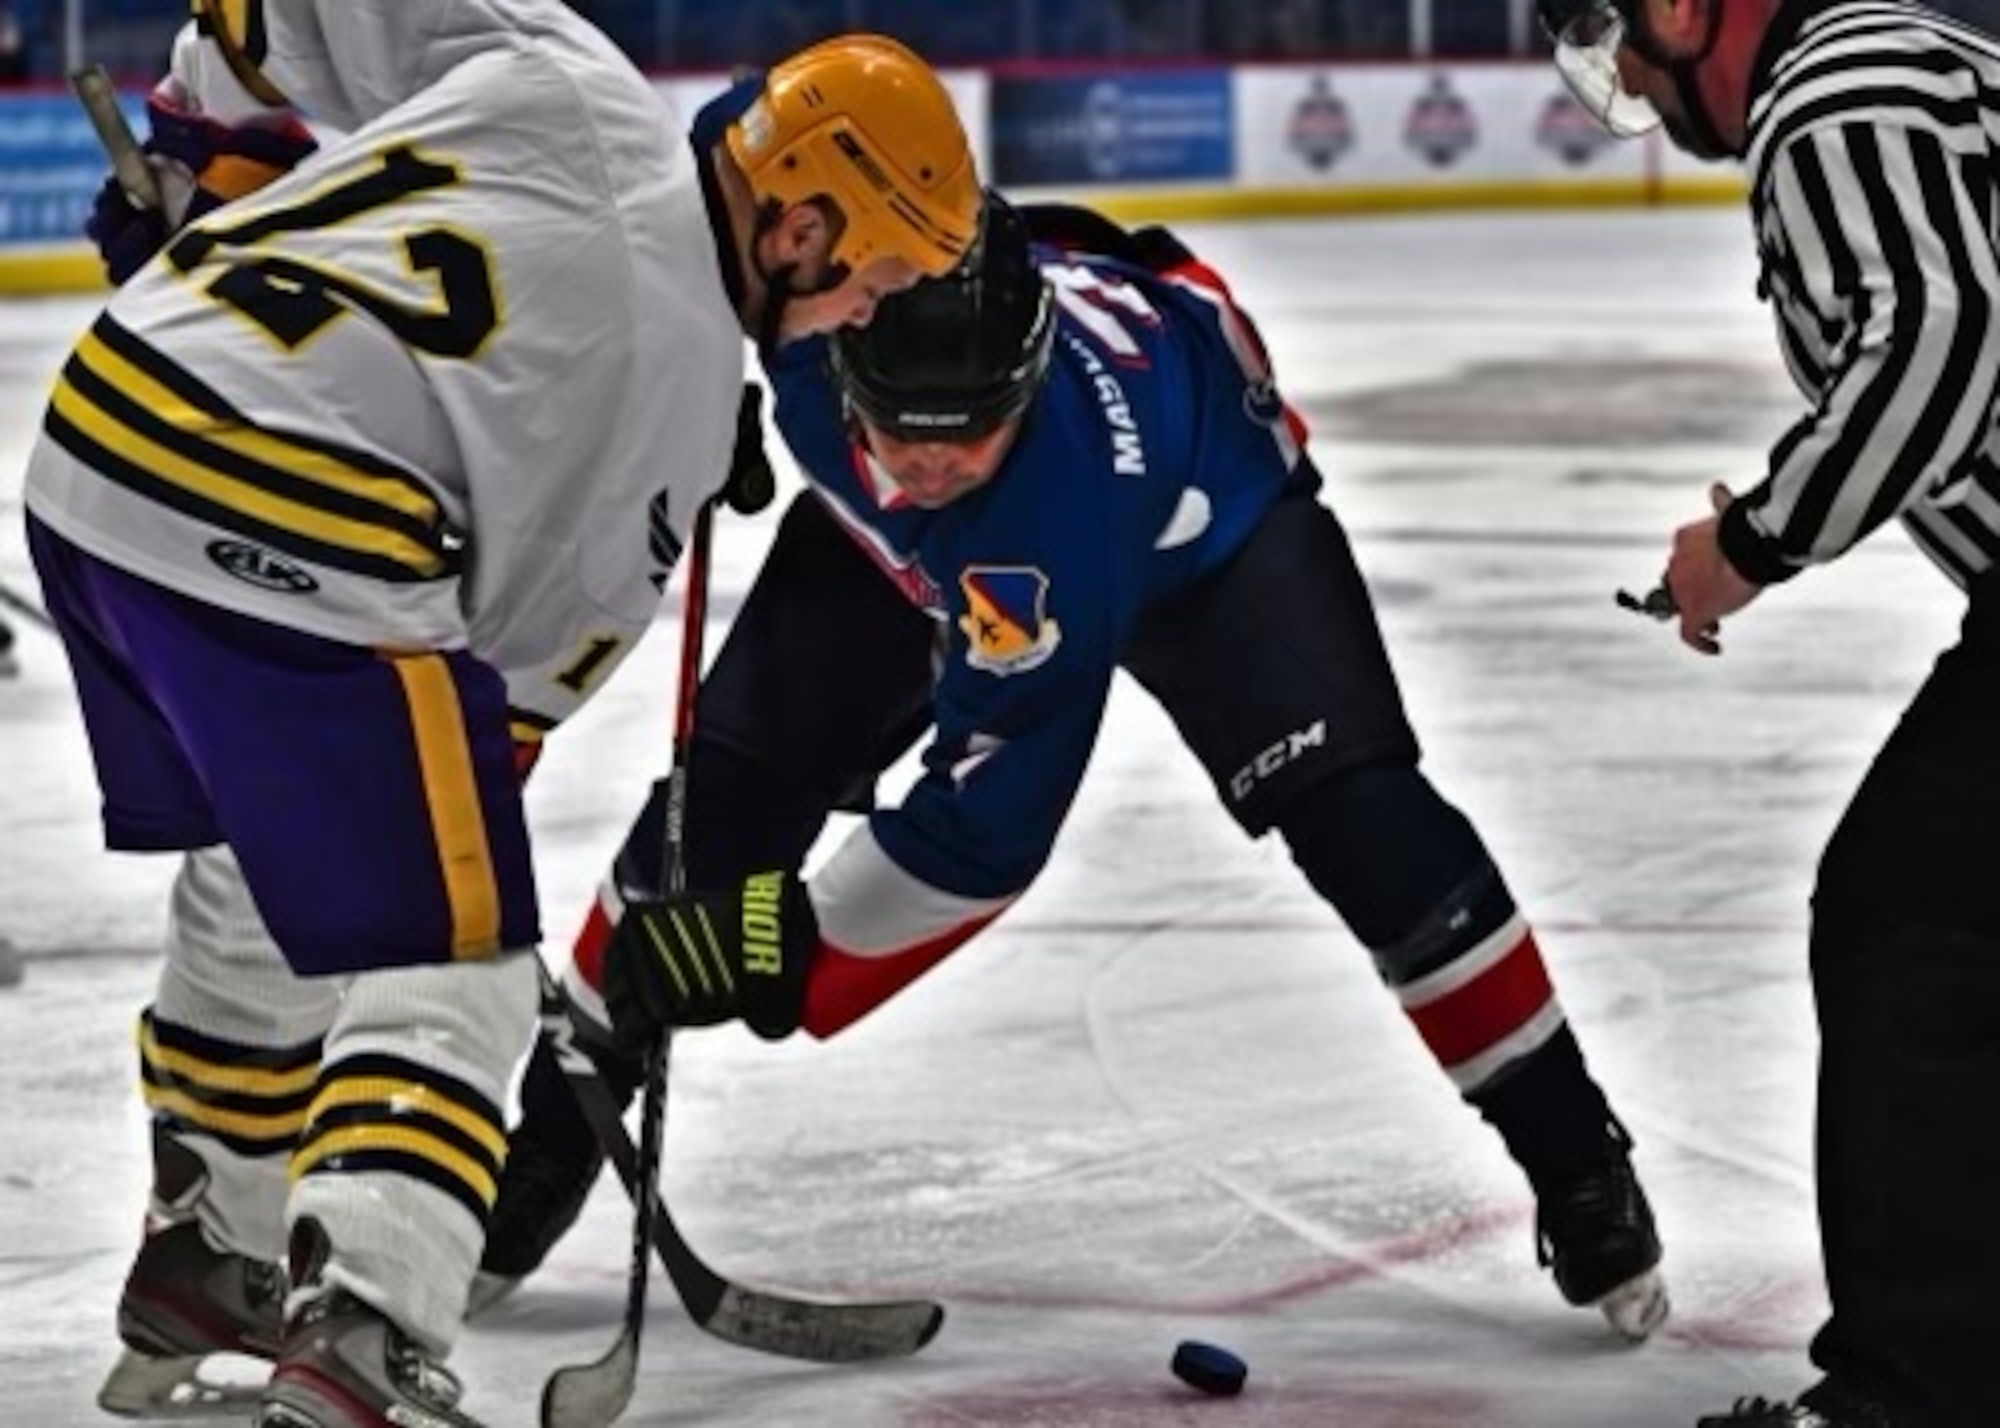 The 103rd Airlift Wing’s “Flying Yankees” hockey team, better known as the “Greatest Show On Ice”, started the season facing-off against the 104th Fighter Wing’s Barnestormers, February 18, 2023, at the XL Center in Hartford, Conn.